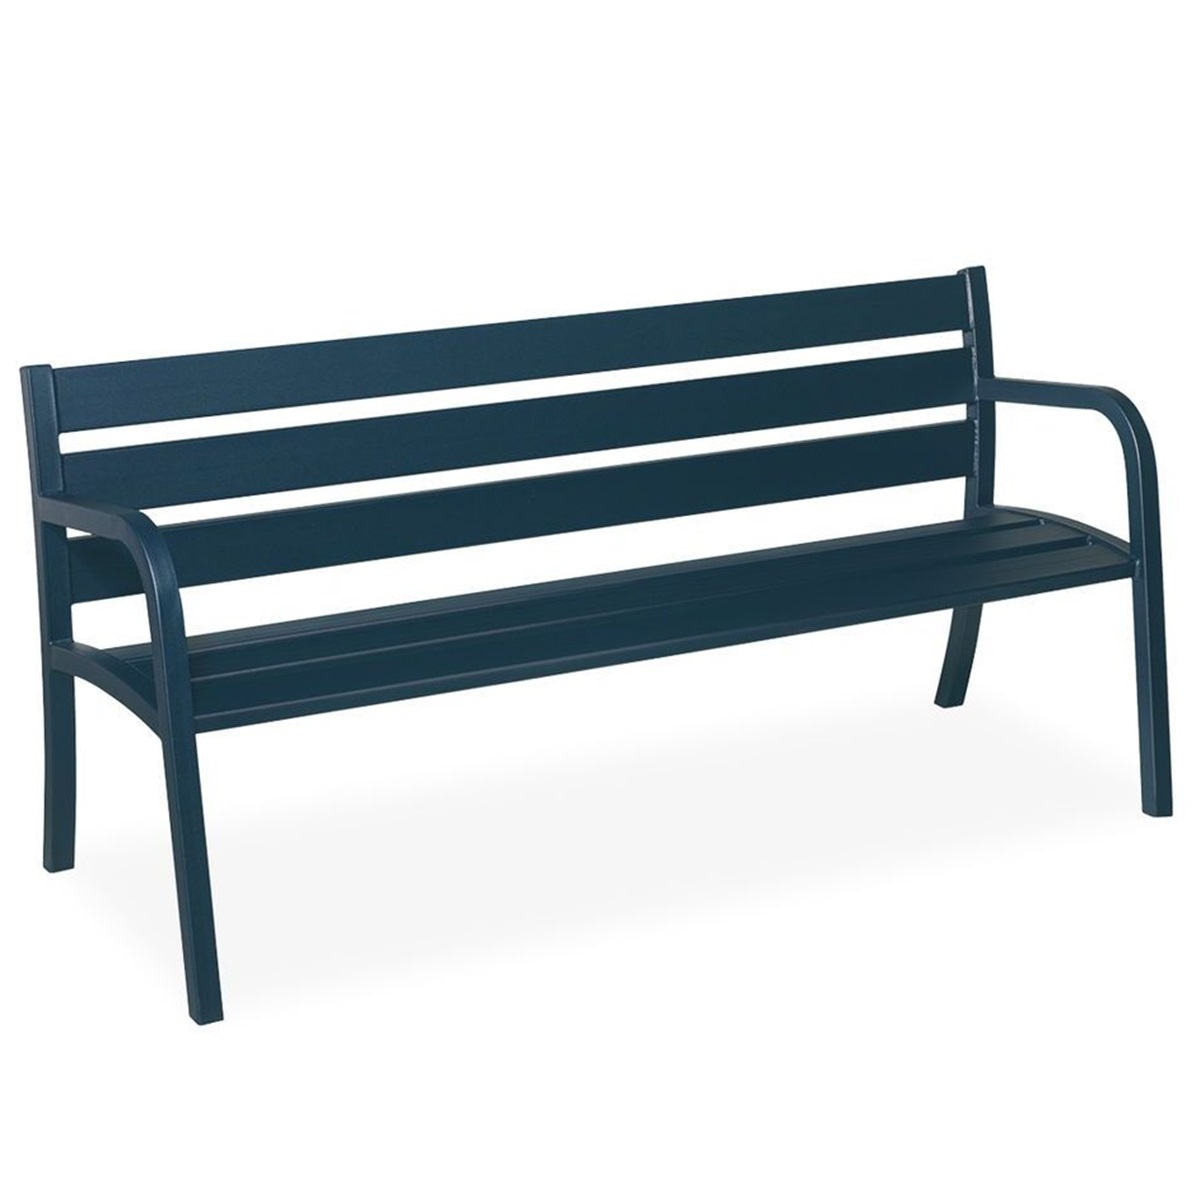 Modo Bench C-106-METAL zoomed